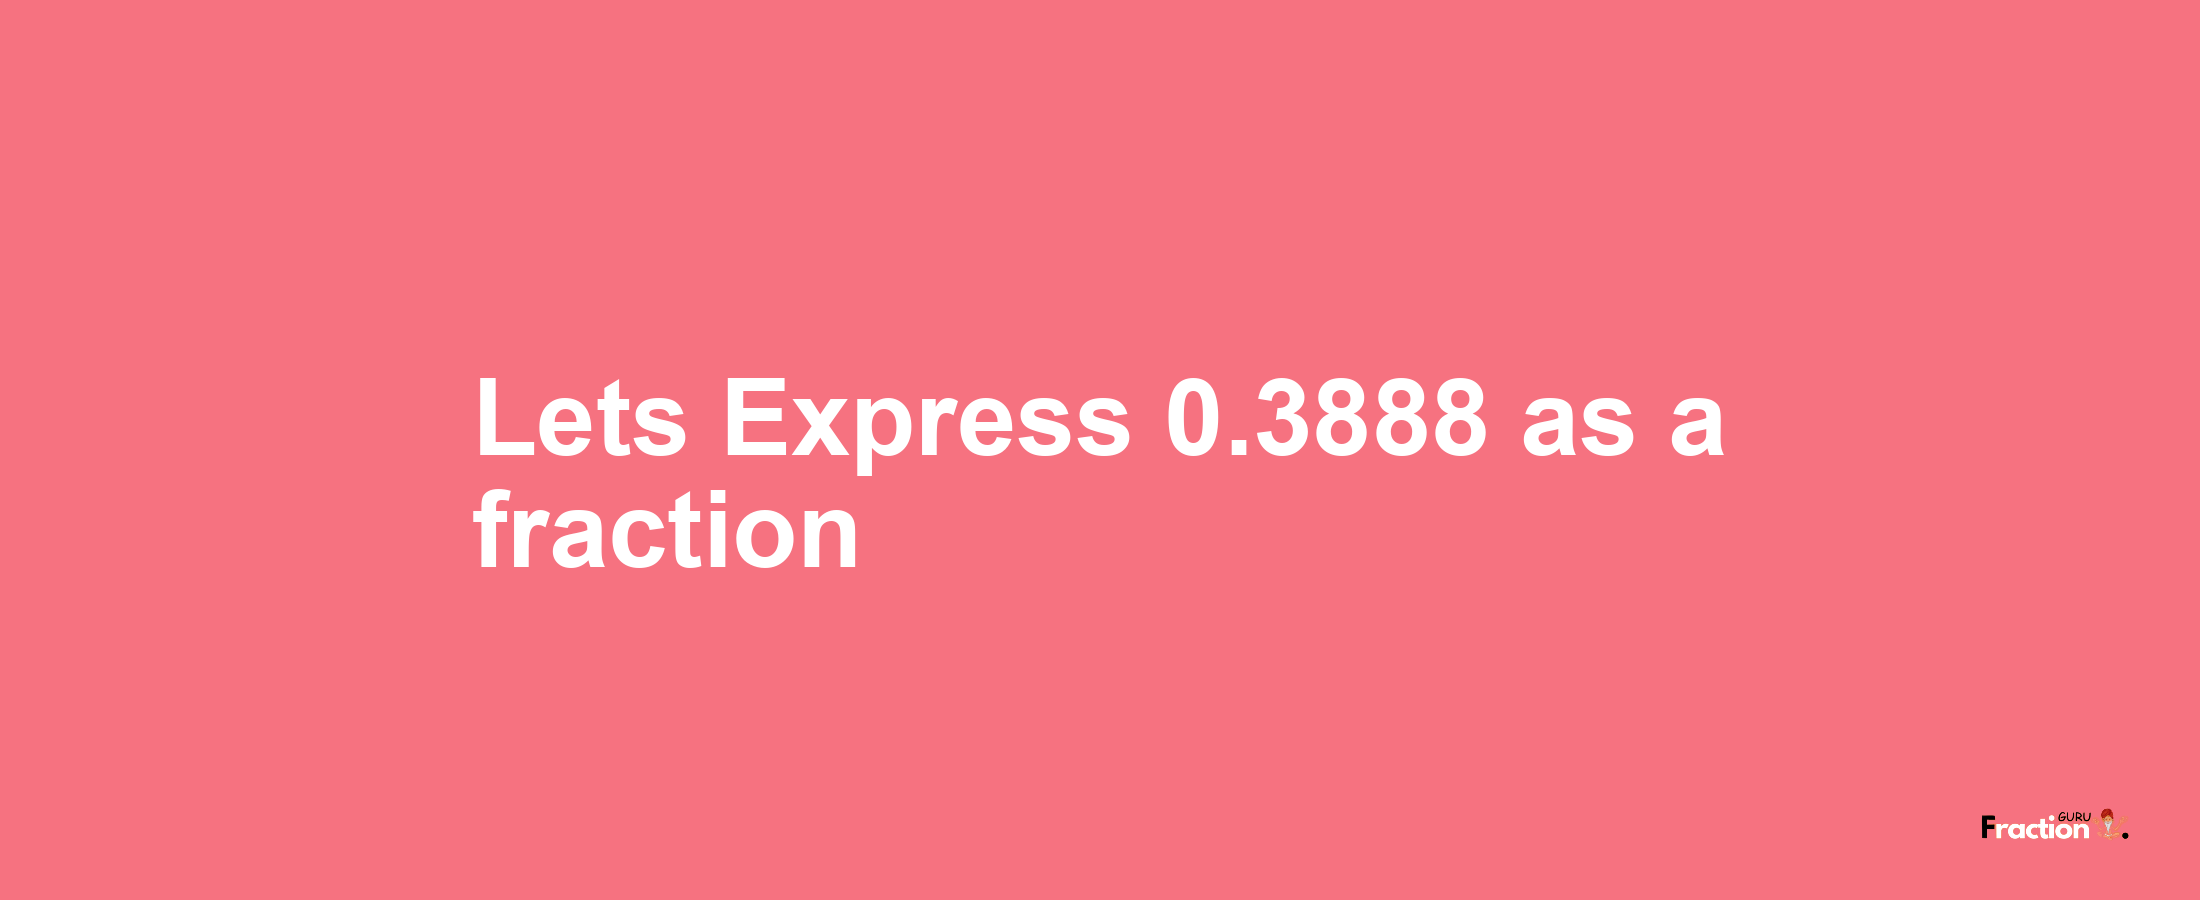 Lets Express 0.3888 as afraction